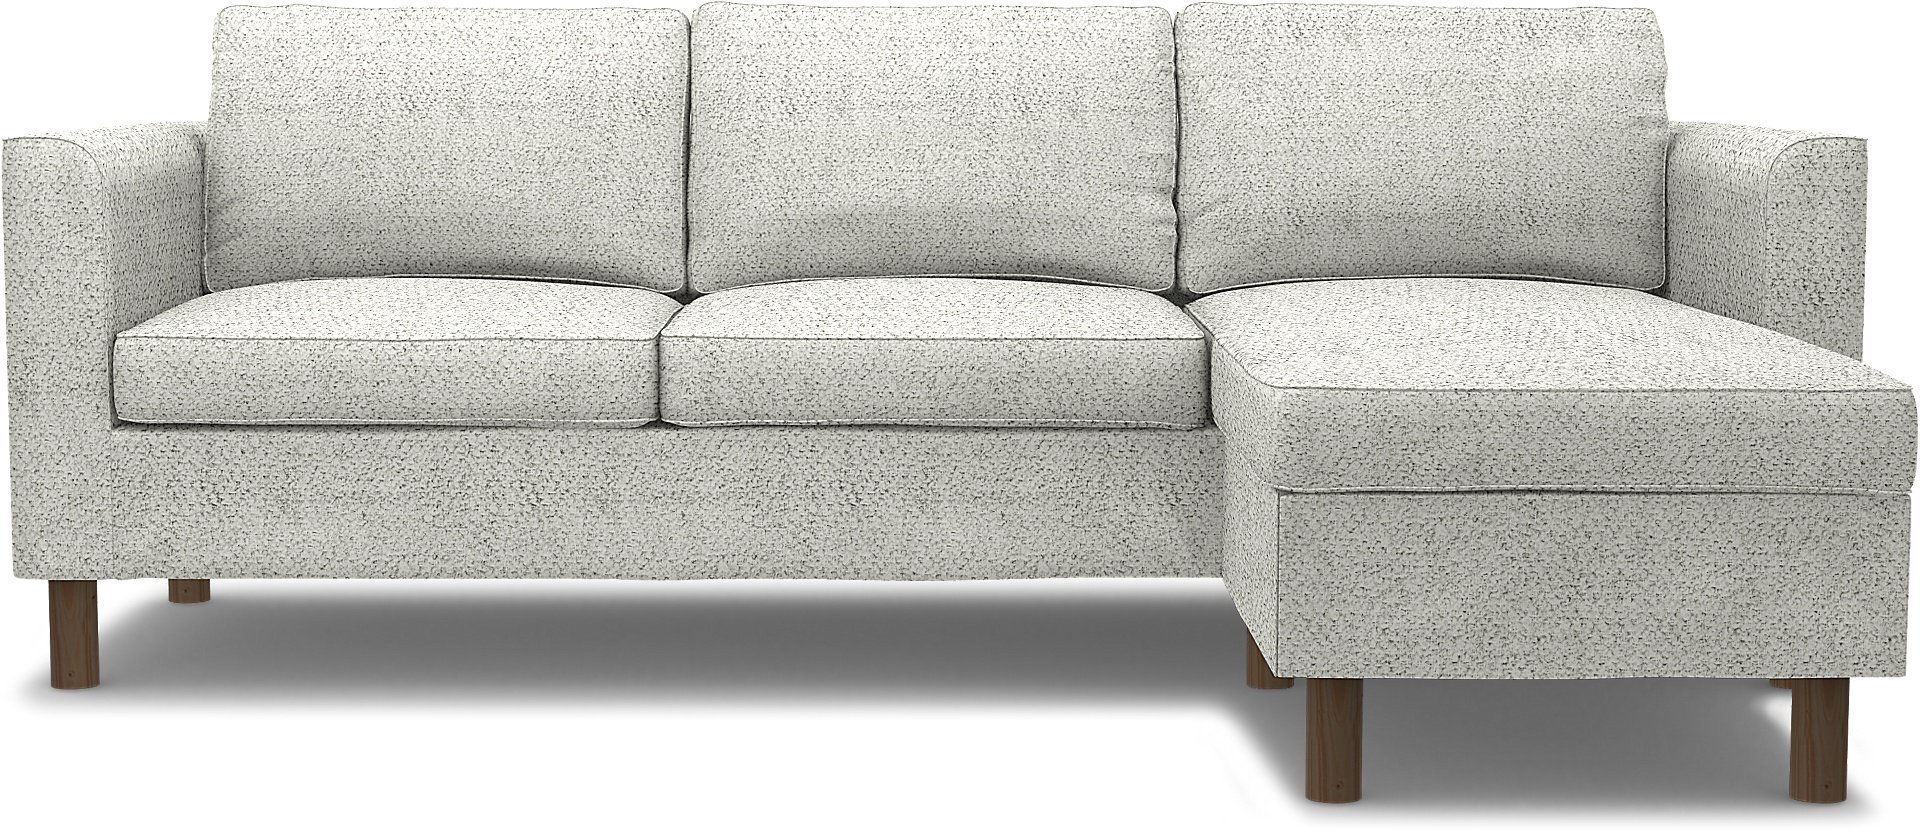 IKEA - Parup 3 Seater with chaise longue, Ivory, Boucle & Texture - Bemz